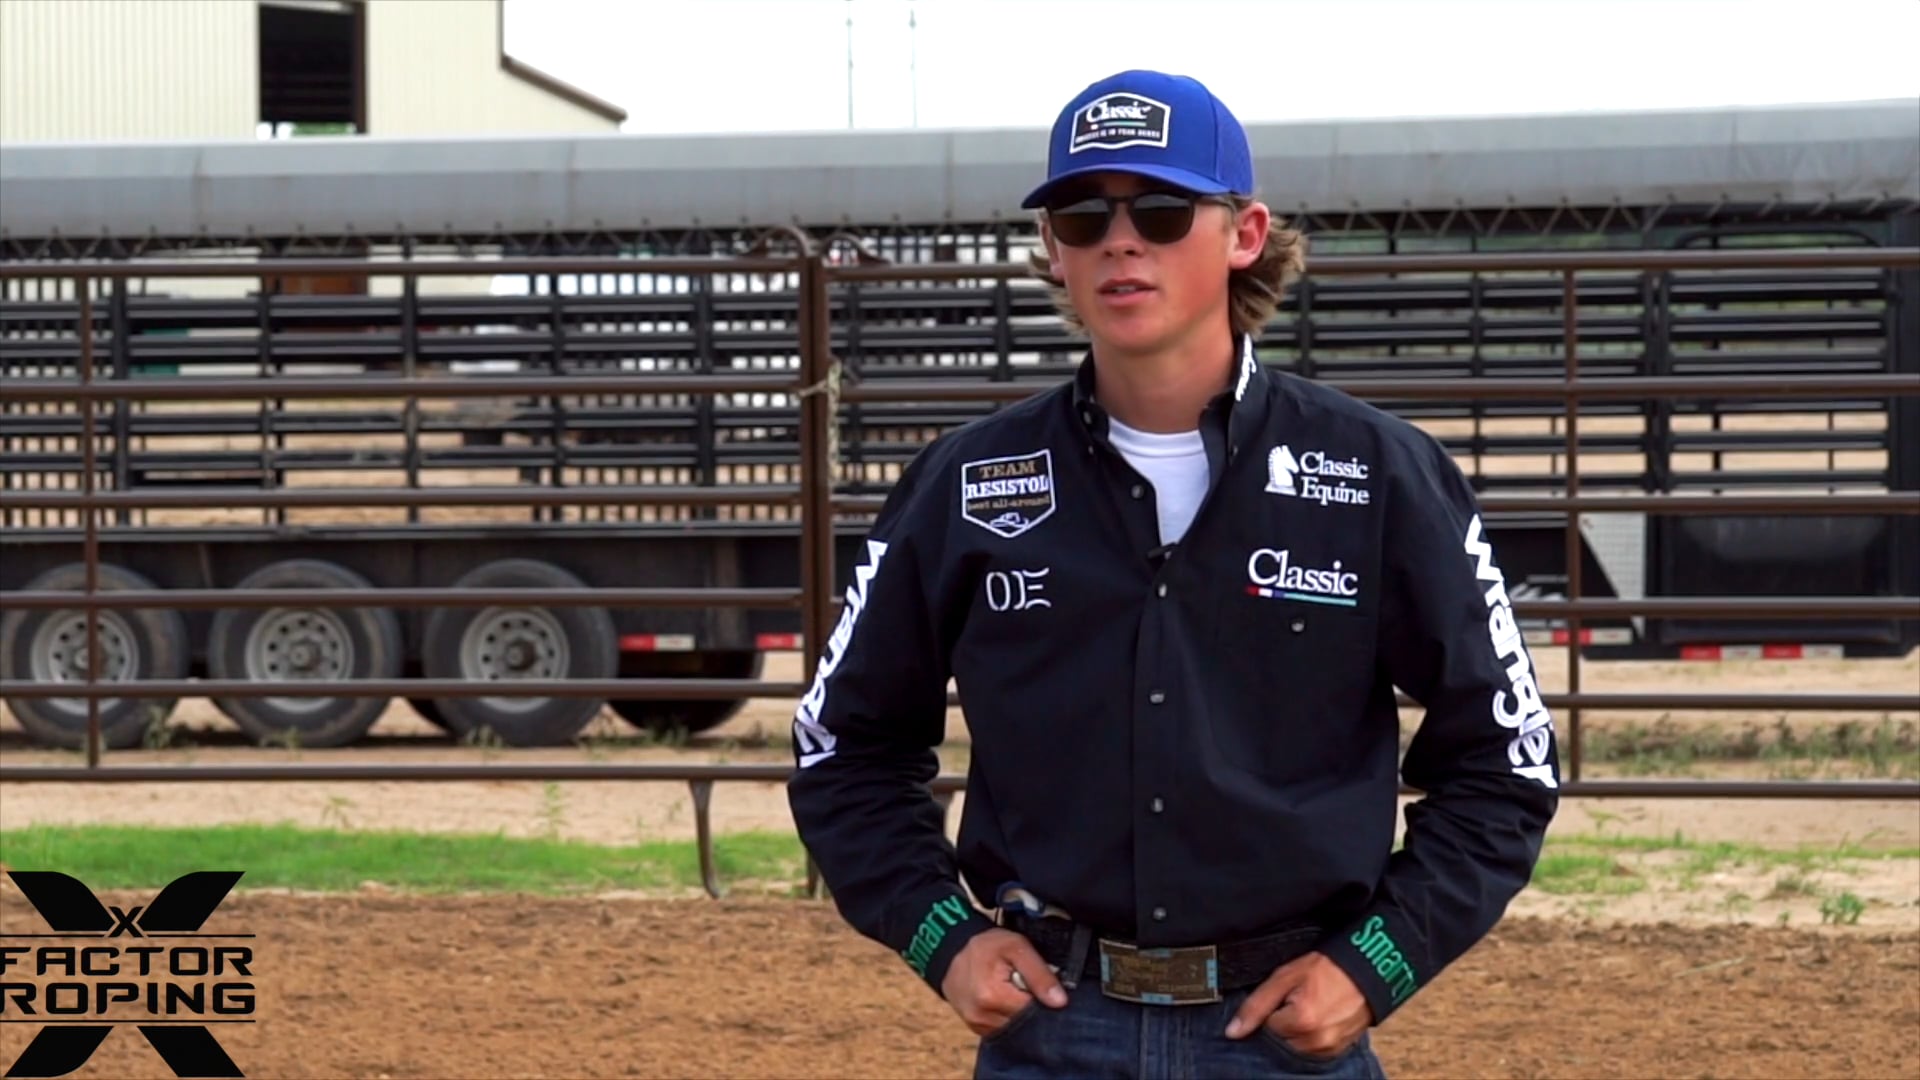 FREE Keeping Your Mind in the Roping with Jaxson Tucker